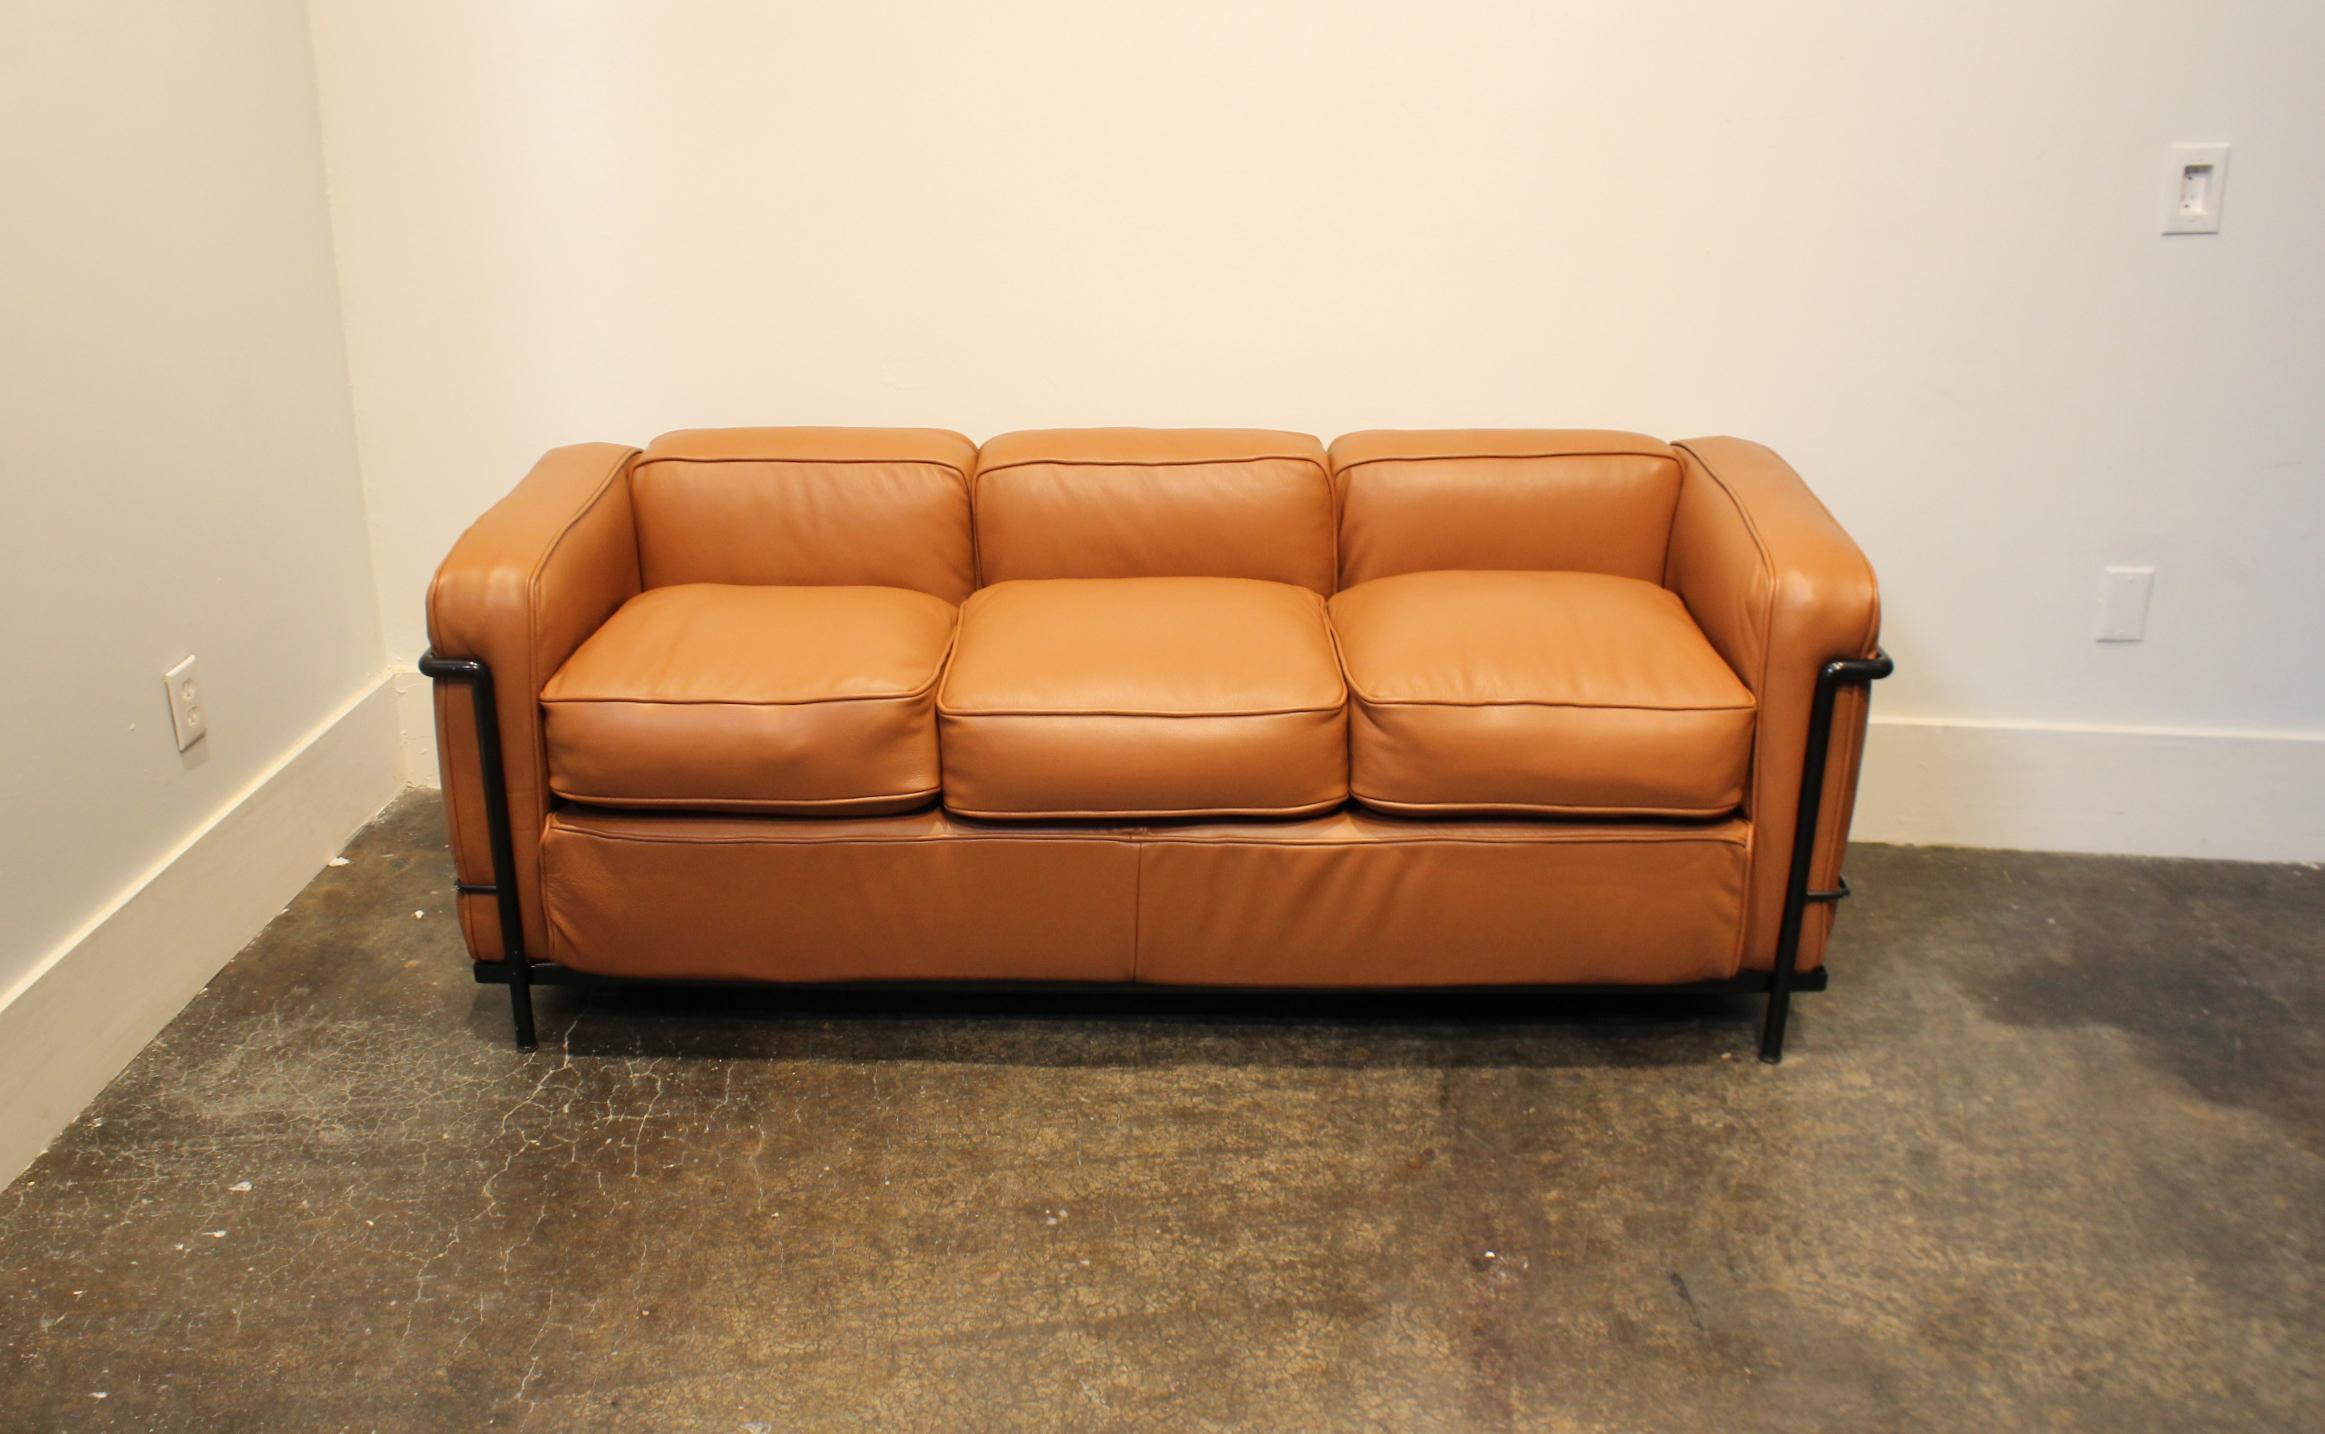 Black, enameled-steel, tubular frame with thick, newly upholstered caramel/brown leather. Made in Italy by Cassina during the 1970s-1980s. Cassina stamp on inside of steel frame. Very light wear to frame, brand new leather.